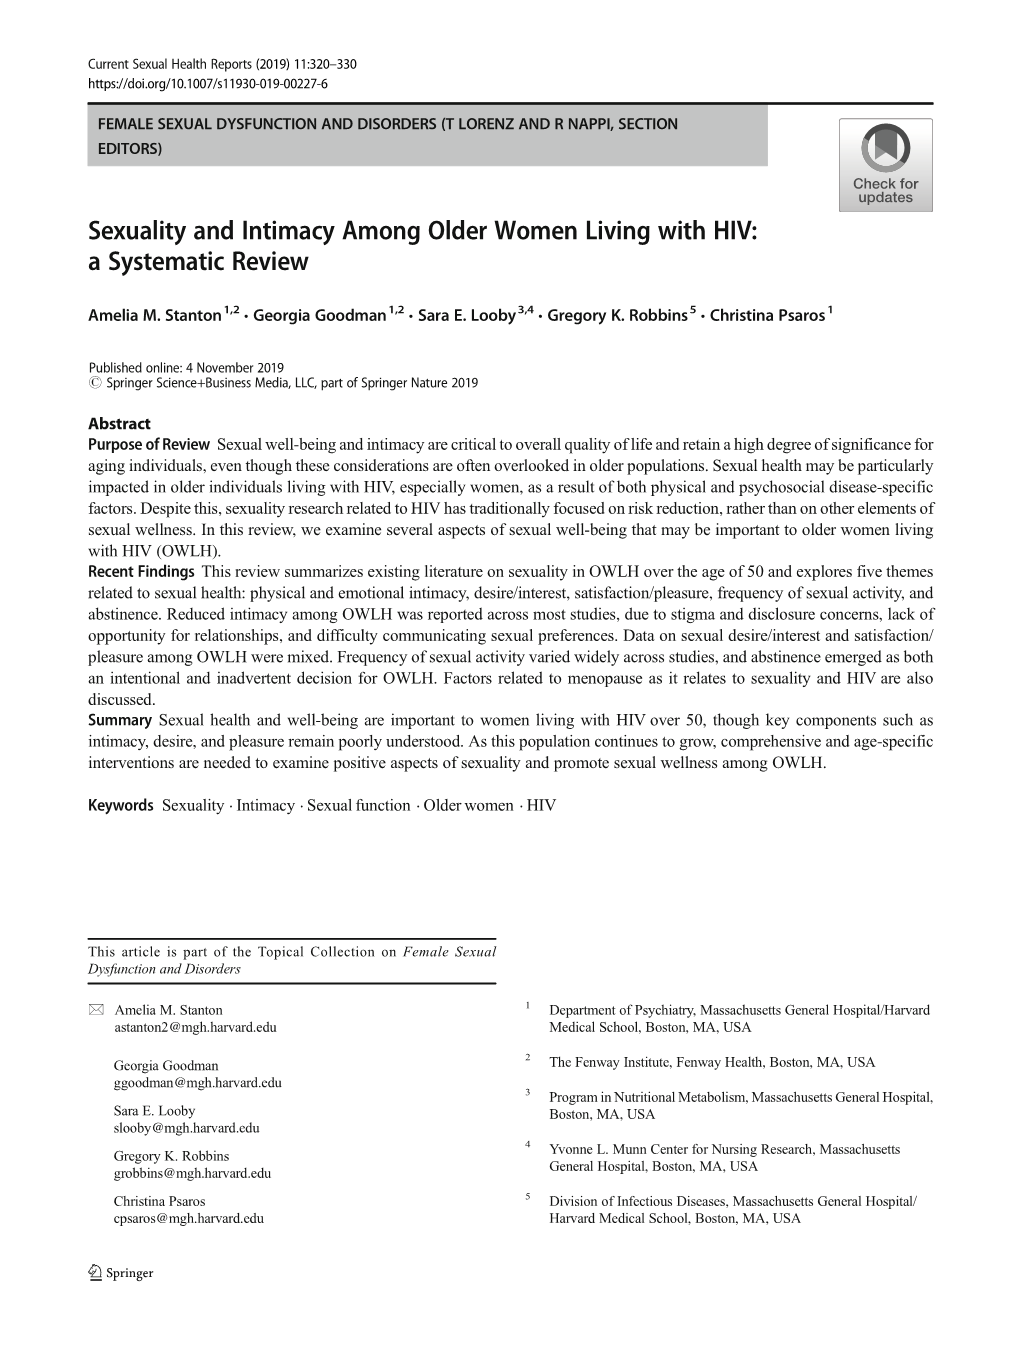 Sexuality and Intimacy Among Older Women Living with HIV: a Systematic Review